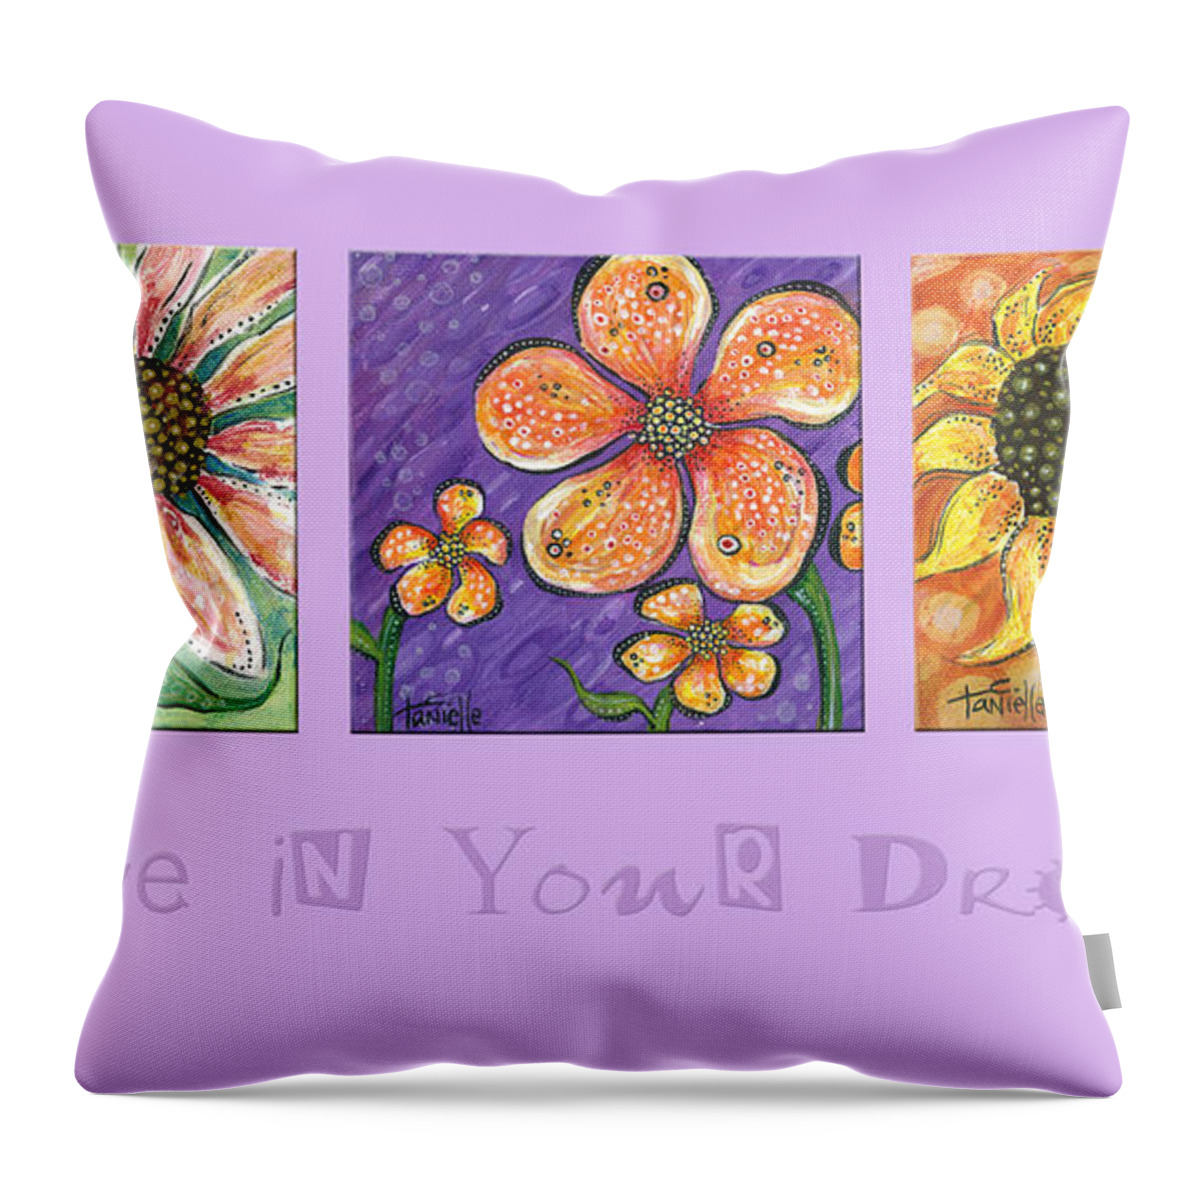 Floral Paintings Throw Pillow featuring the painting Believe in Your Dreams by Tanielle Childers